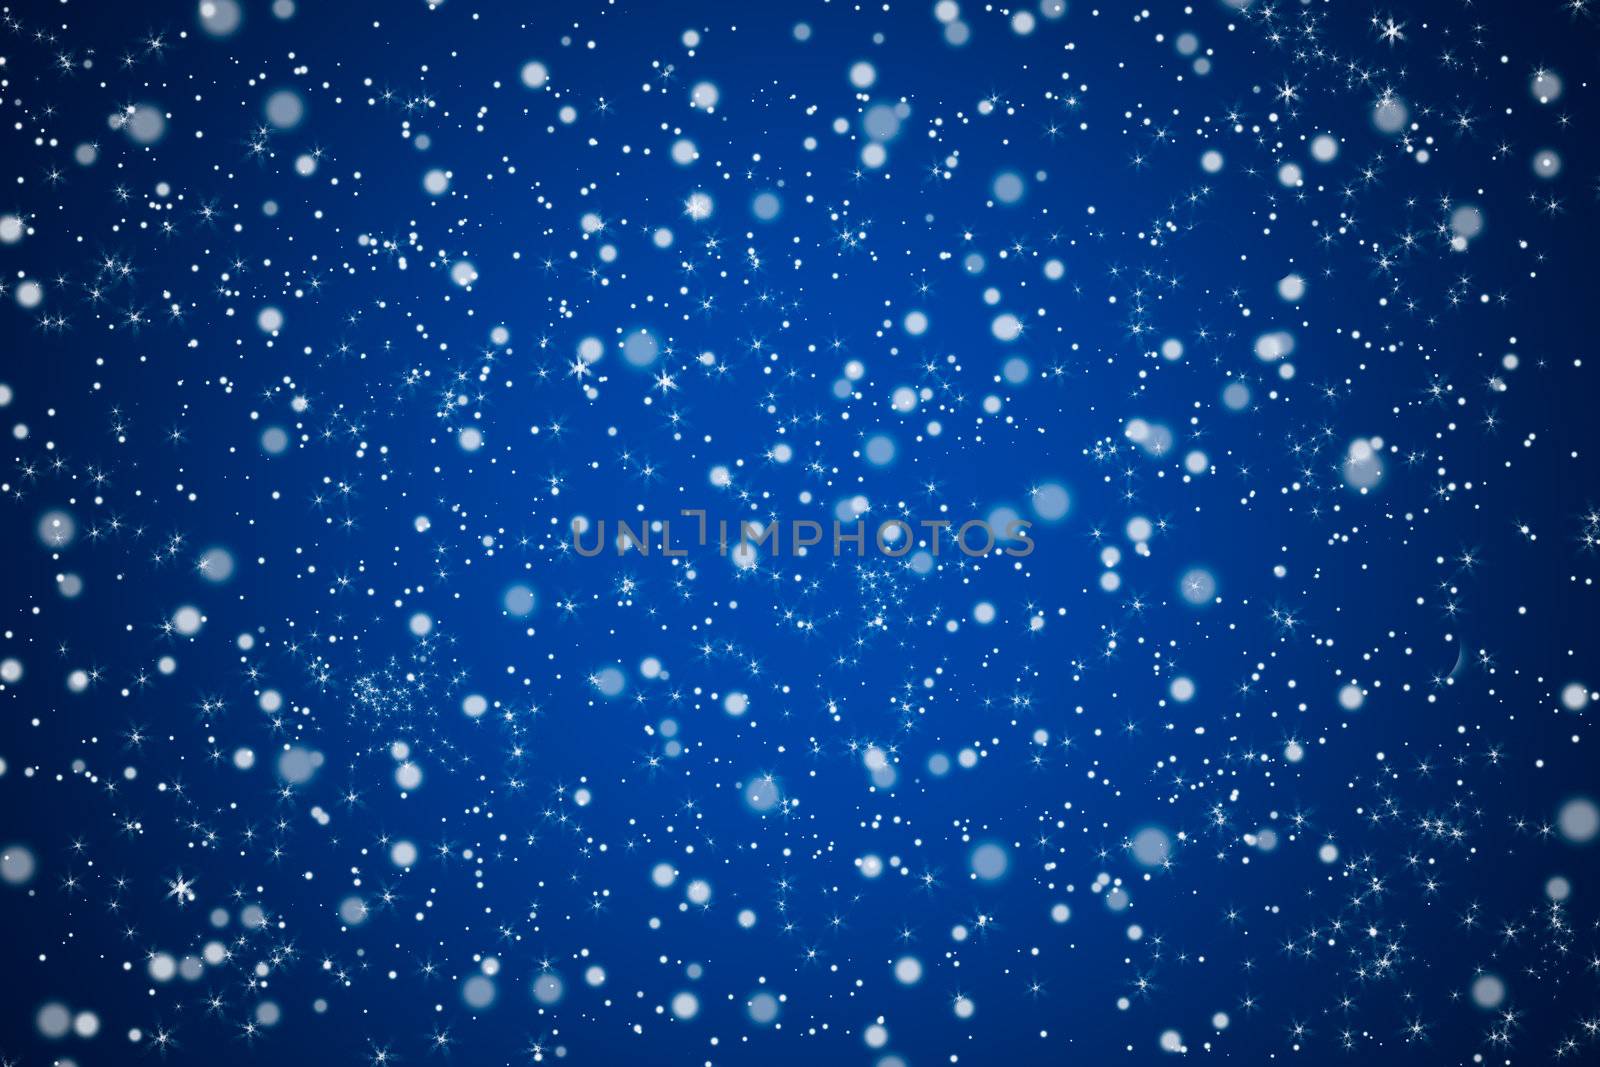 Pretty Blue Night Sky with Stars and Lights Background by scheriton